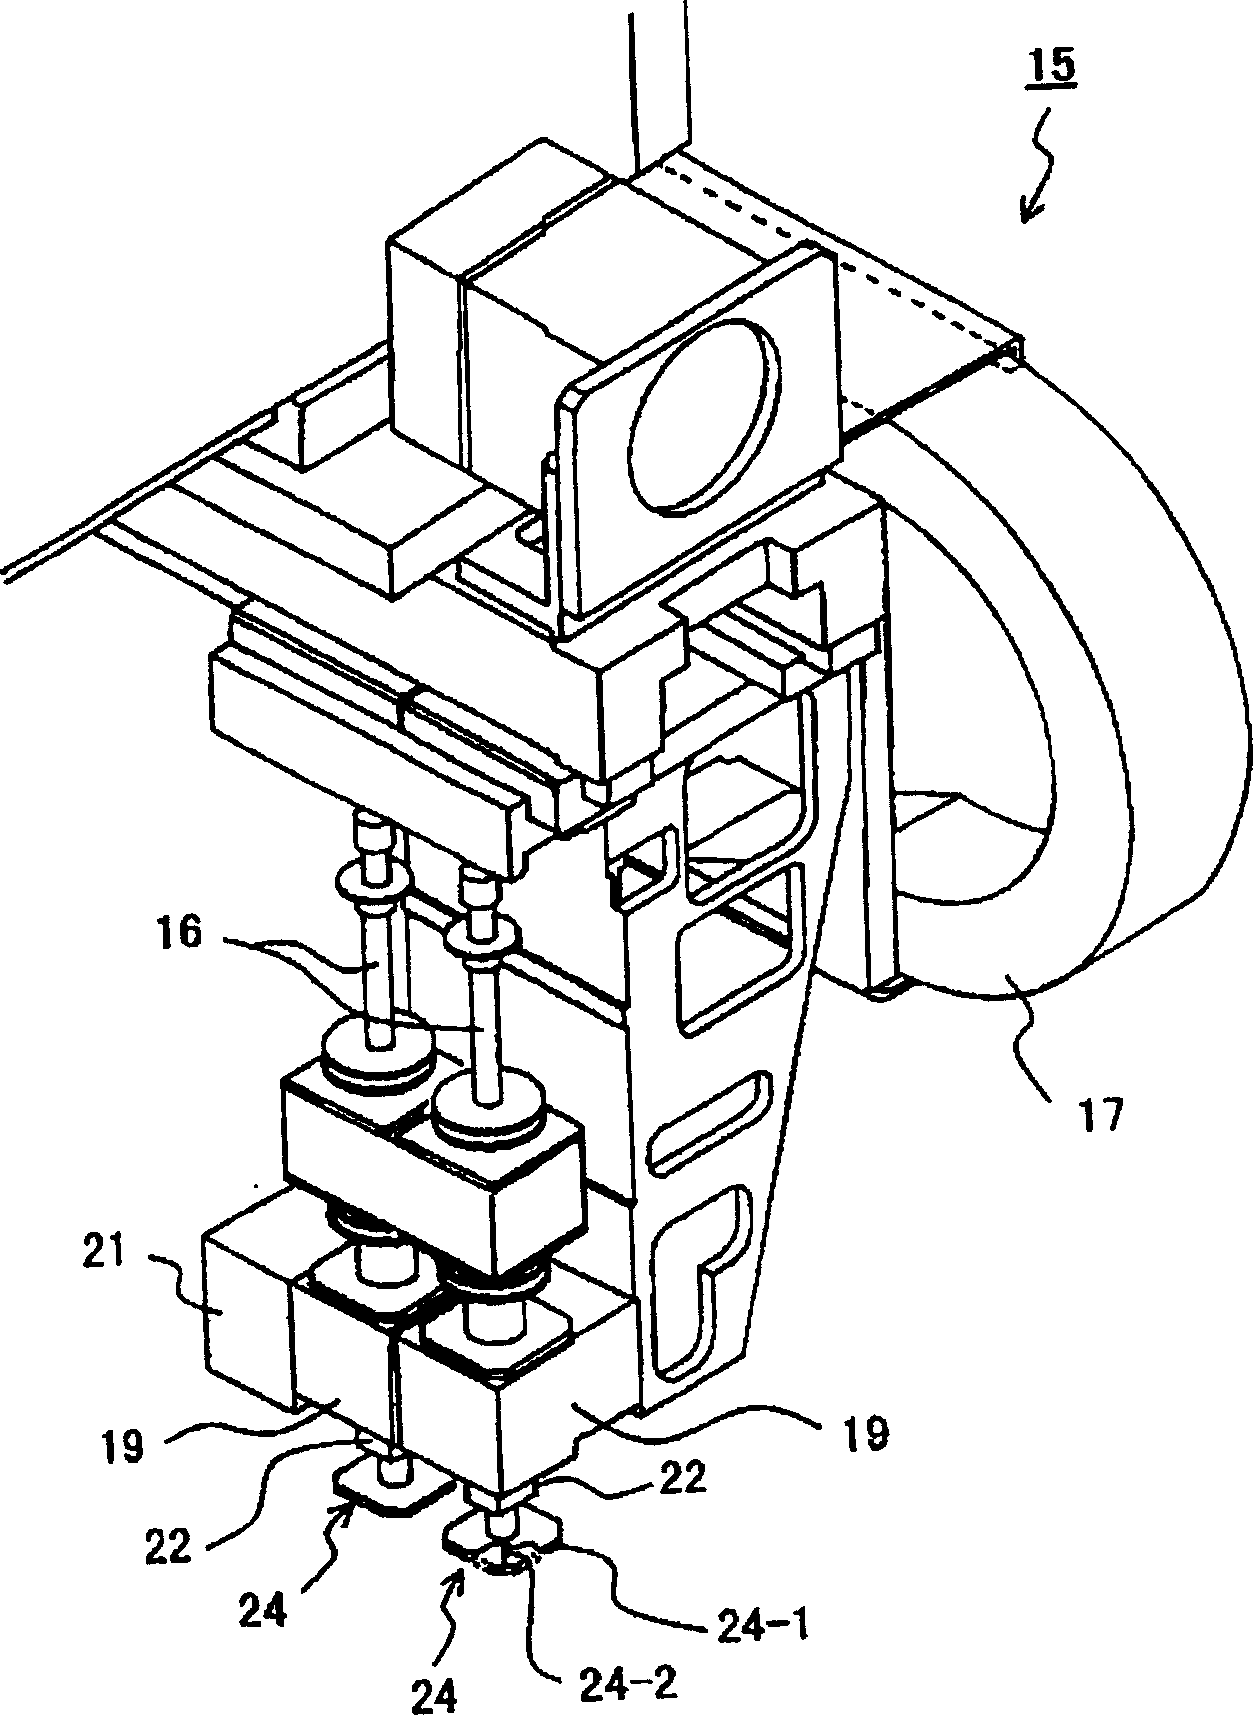 Parts loading device and demonstration method for position adjustment